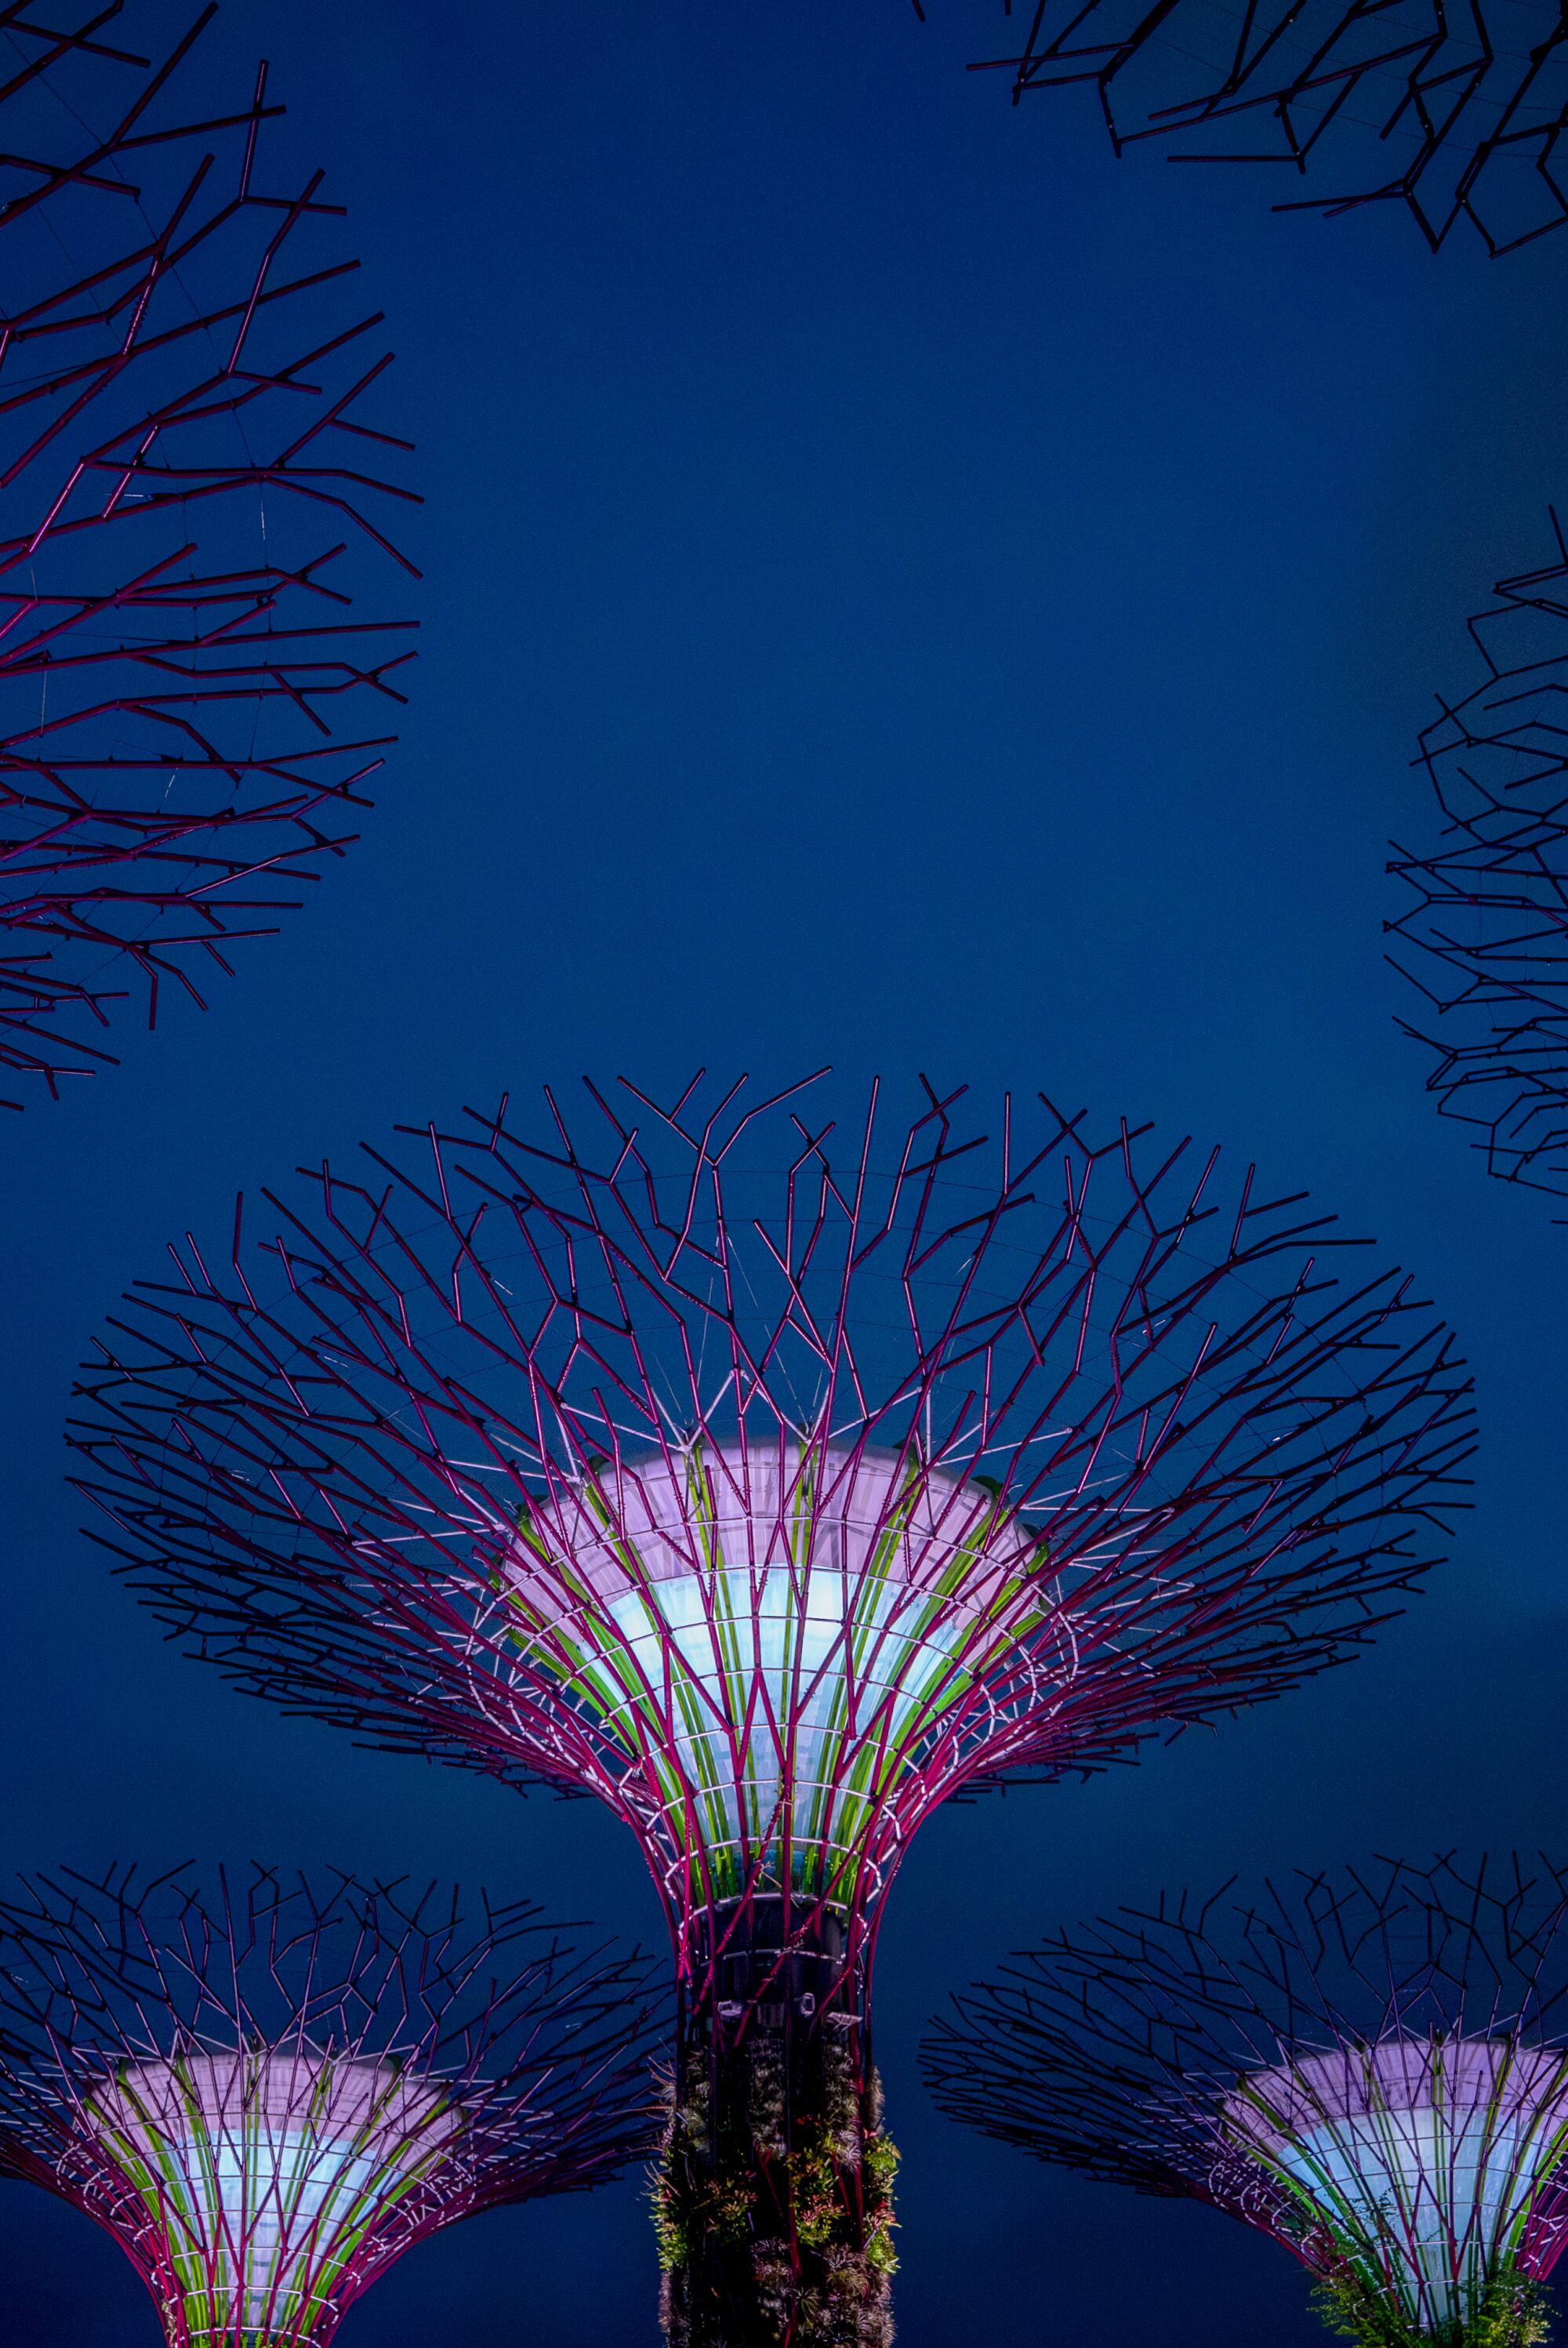 The Supertrees at the Gardens by the Bay in Singapore.